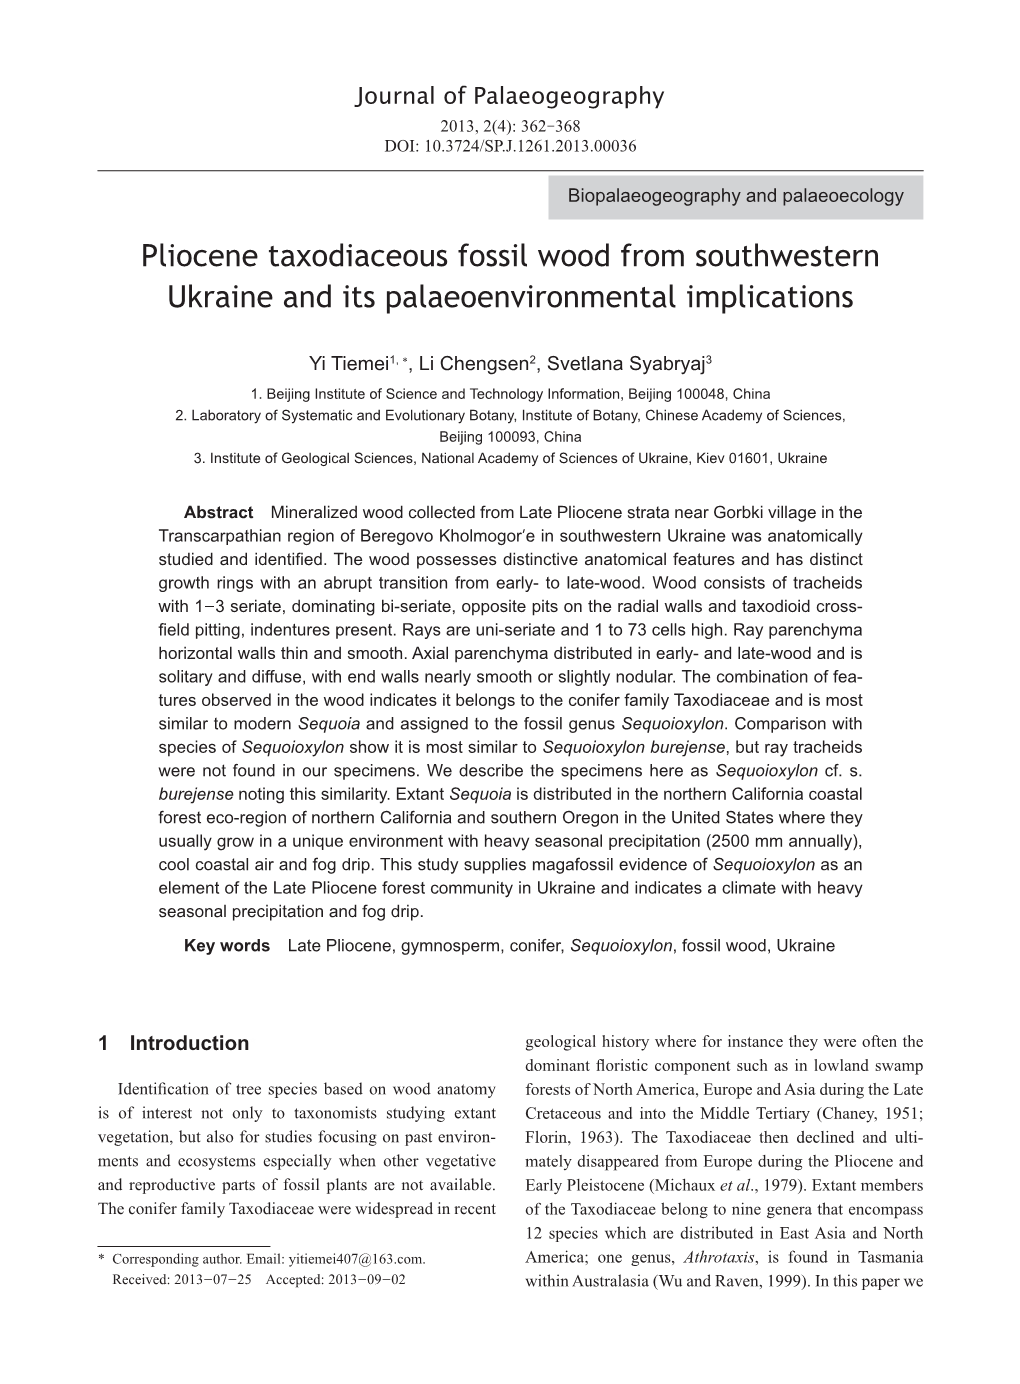 Pliocene Taxodiaceous Fossil Wood from Southwestern Ukraine and Its Palaeoenvironmental Implications